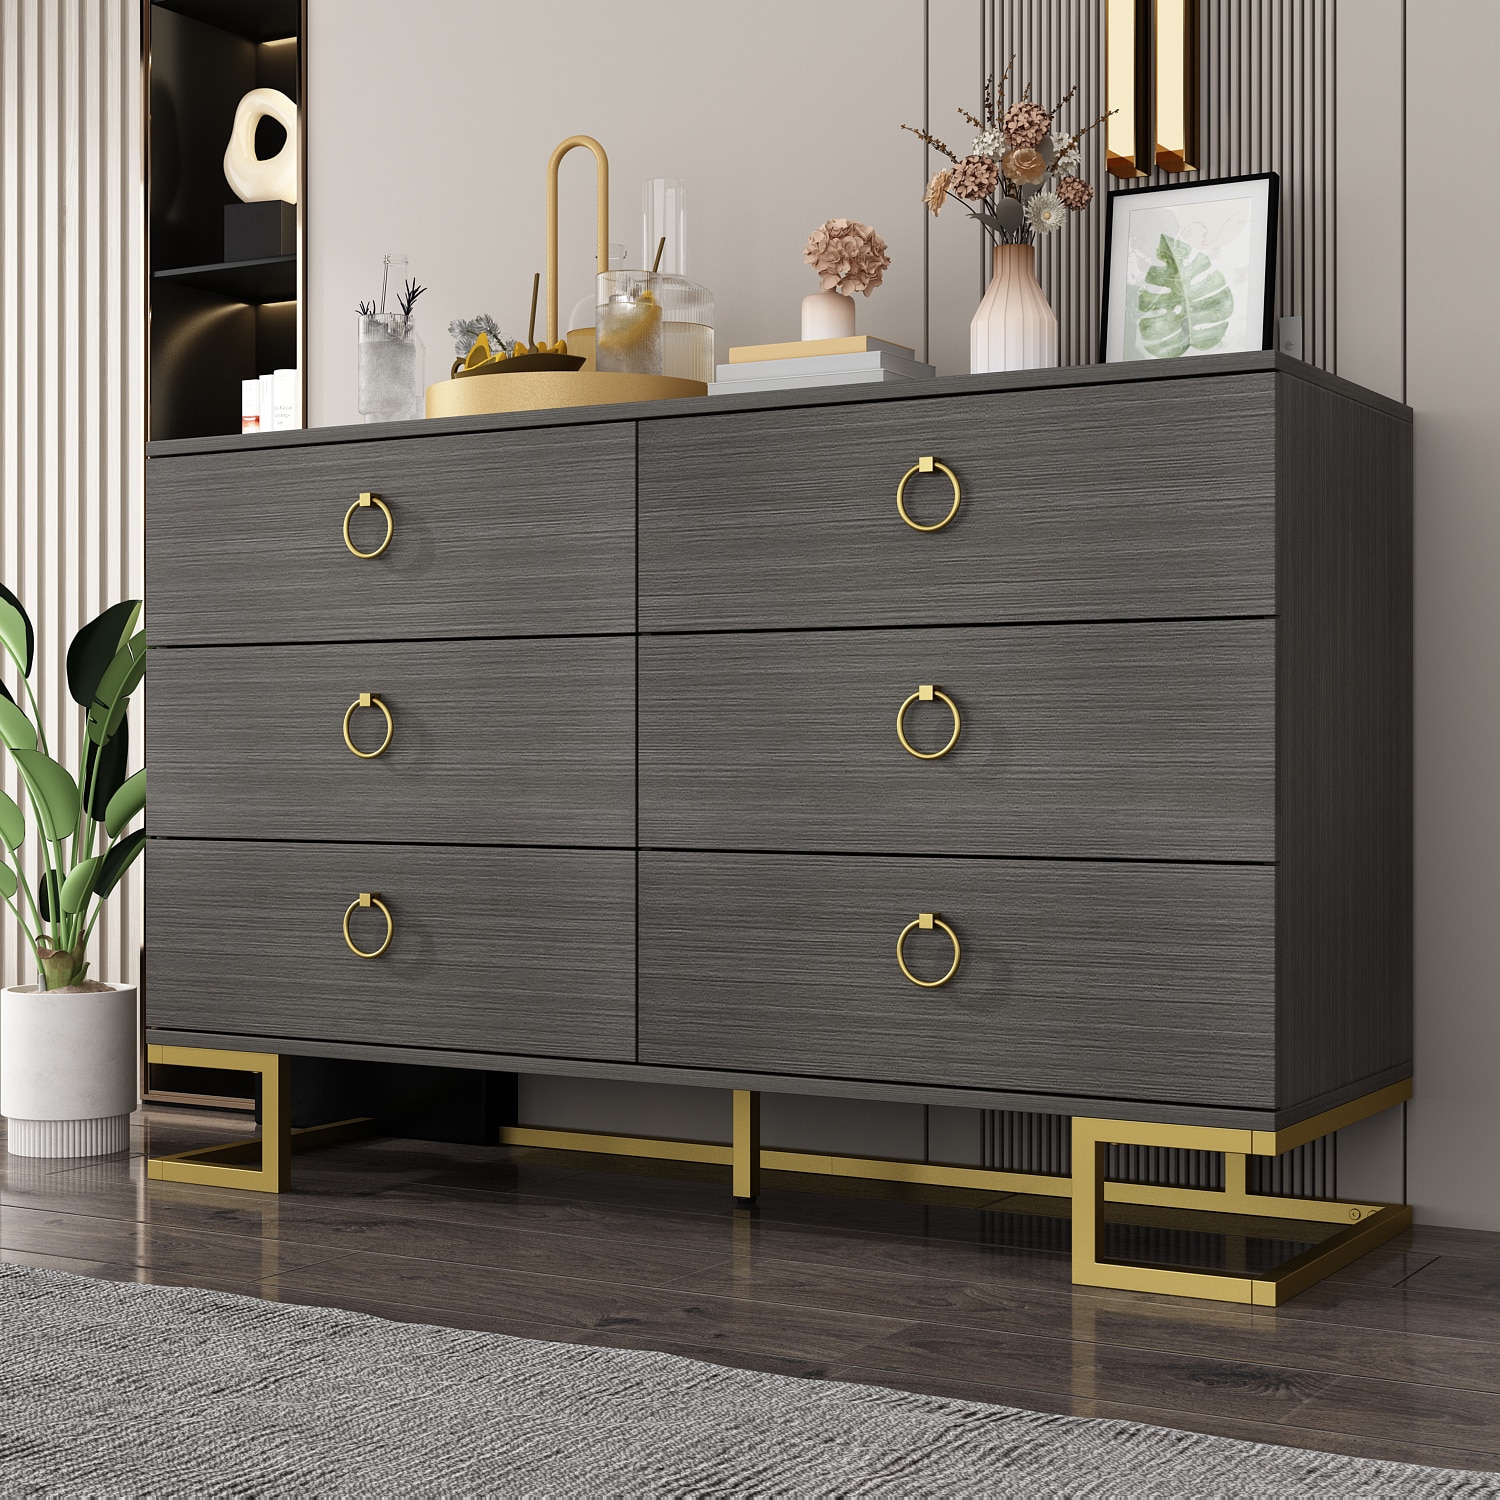 FUFU&GAGA Contemporary Gray 6-Drawer Dresser with Wood Grain Finish,  47.2-in Width, 15.7-in Depth, 29.9-in Height in the Dressers department at